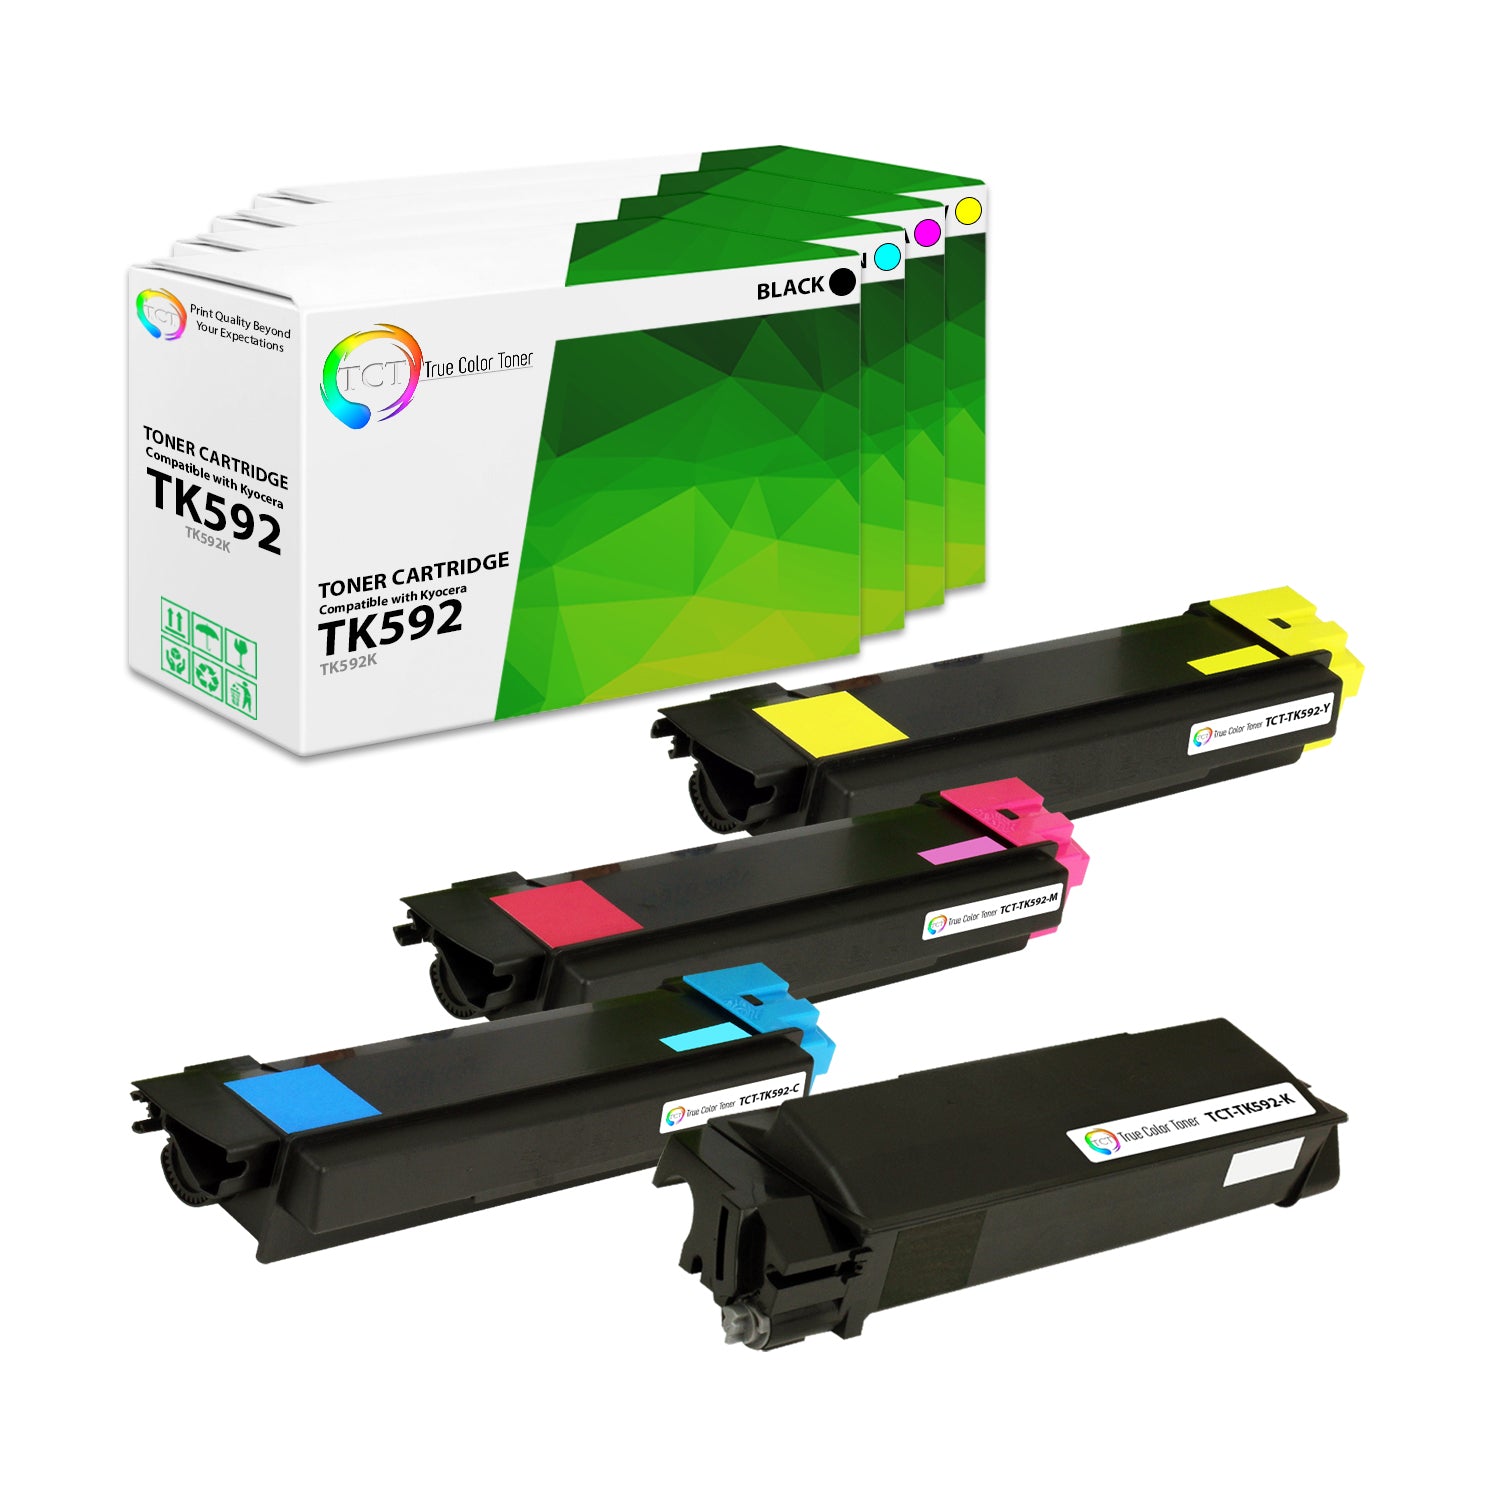 TCT Compatible Toner Cartridge Replacement for the Kyocera TK-592 Series - 4 Pack (BK, C, M, Y)